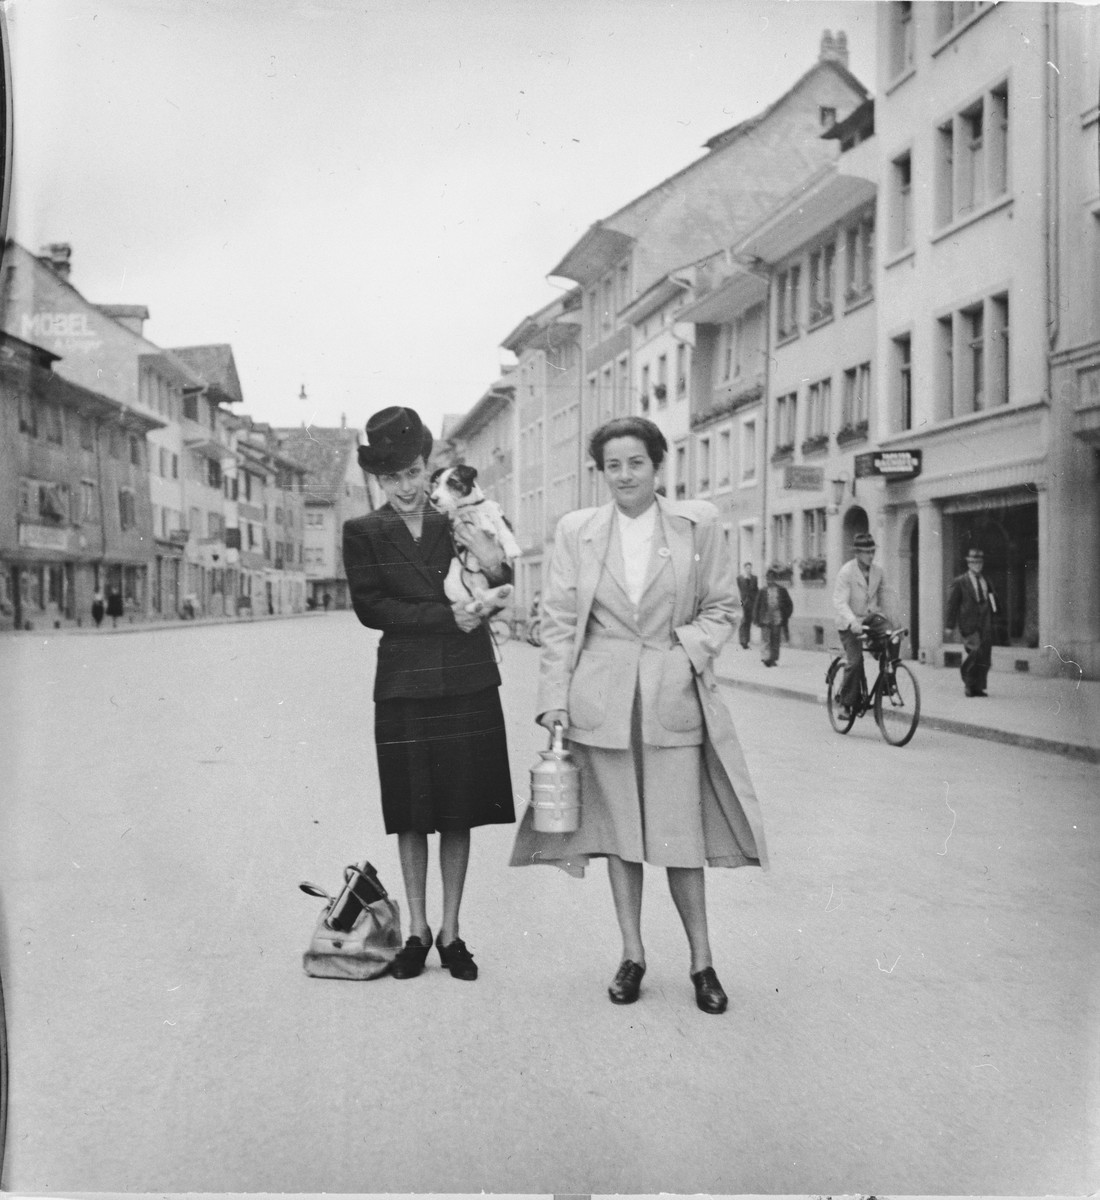 Frieda Belinfante (right) poses with a friend on the Steinbergasse, a historic street in Winterthur, Switzerland.

The photograph was taken shortly after she was allowed to leave the refugee camp Hotel Pellerin.